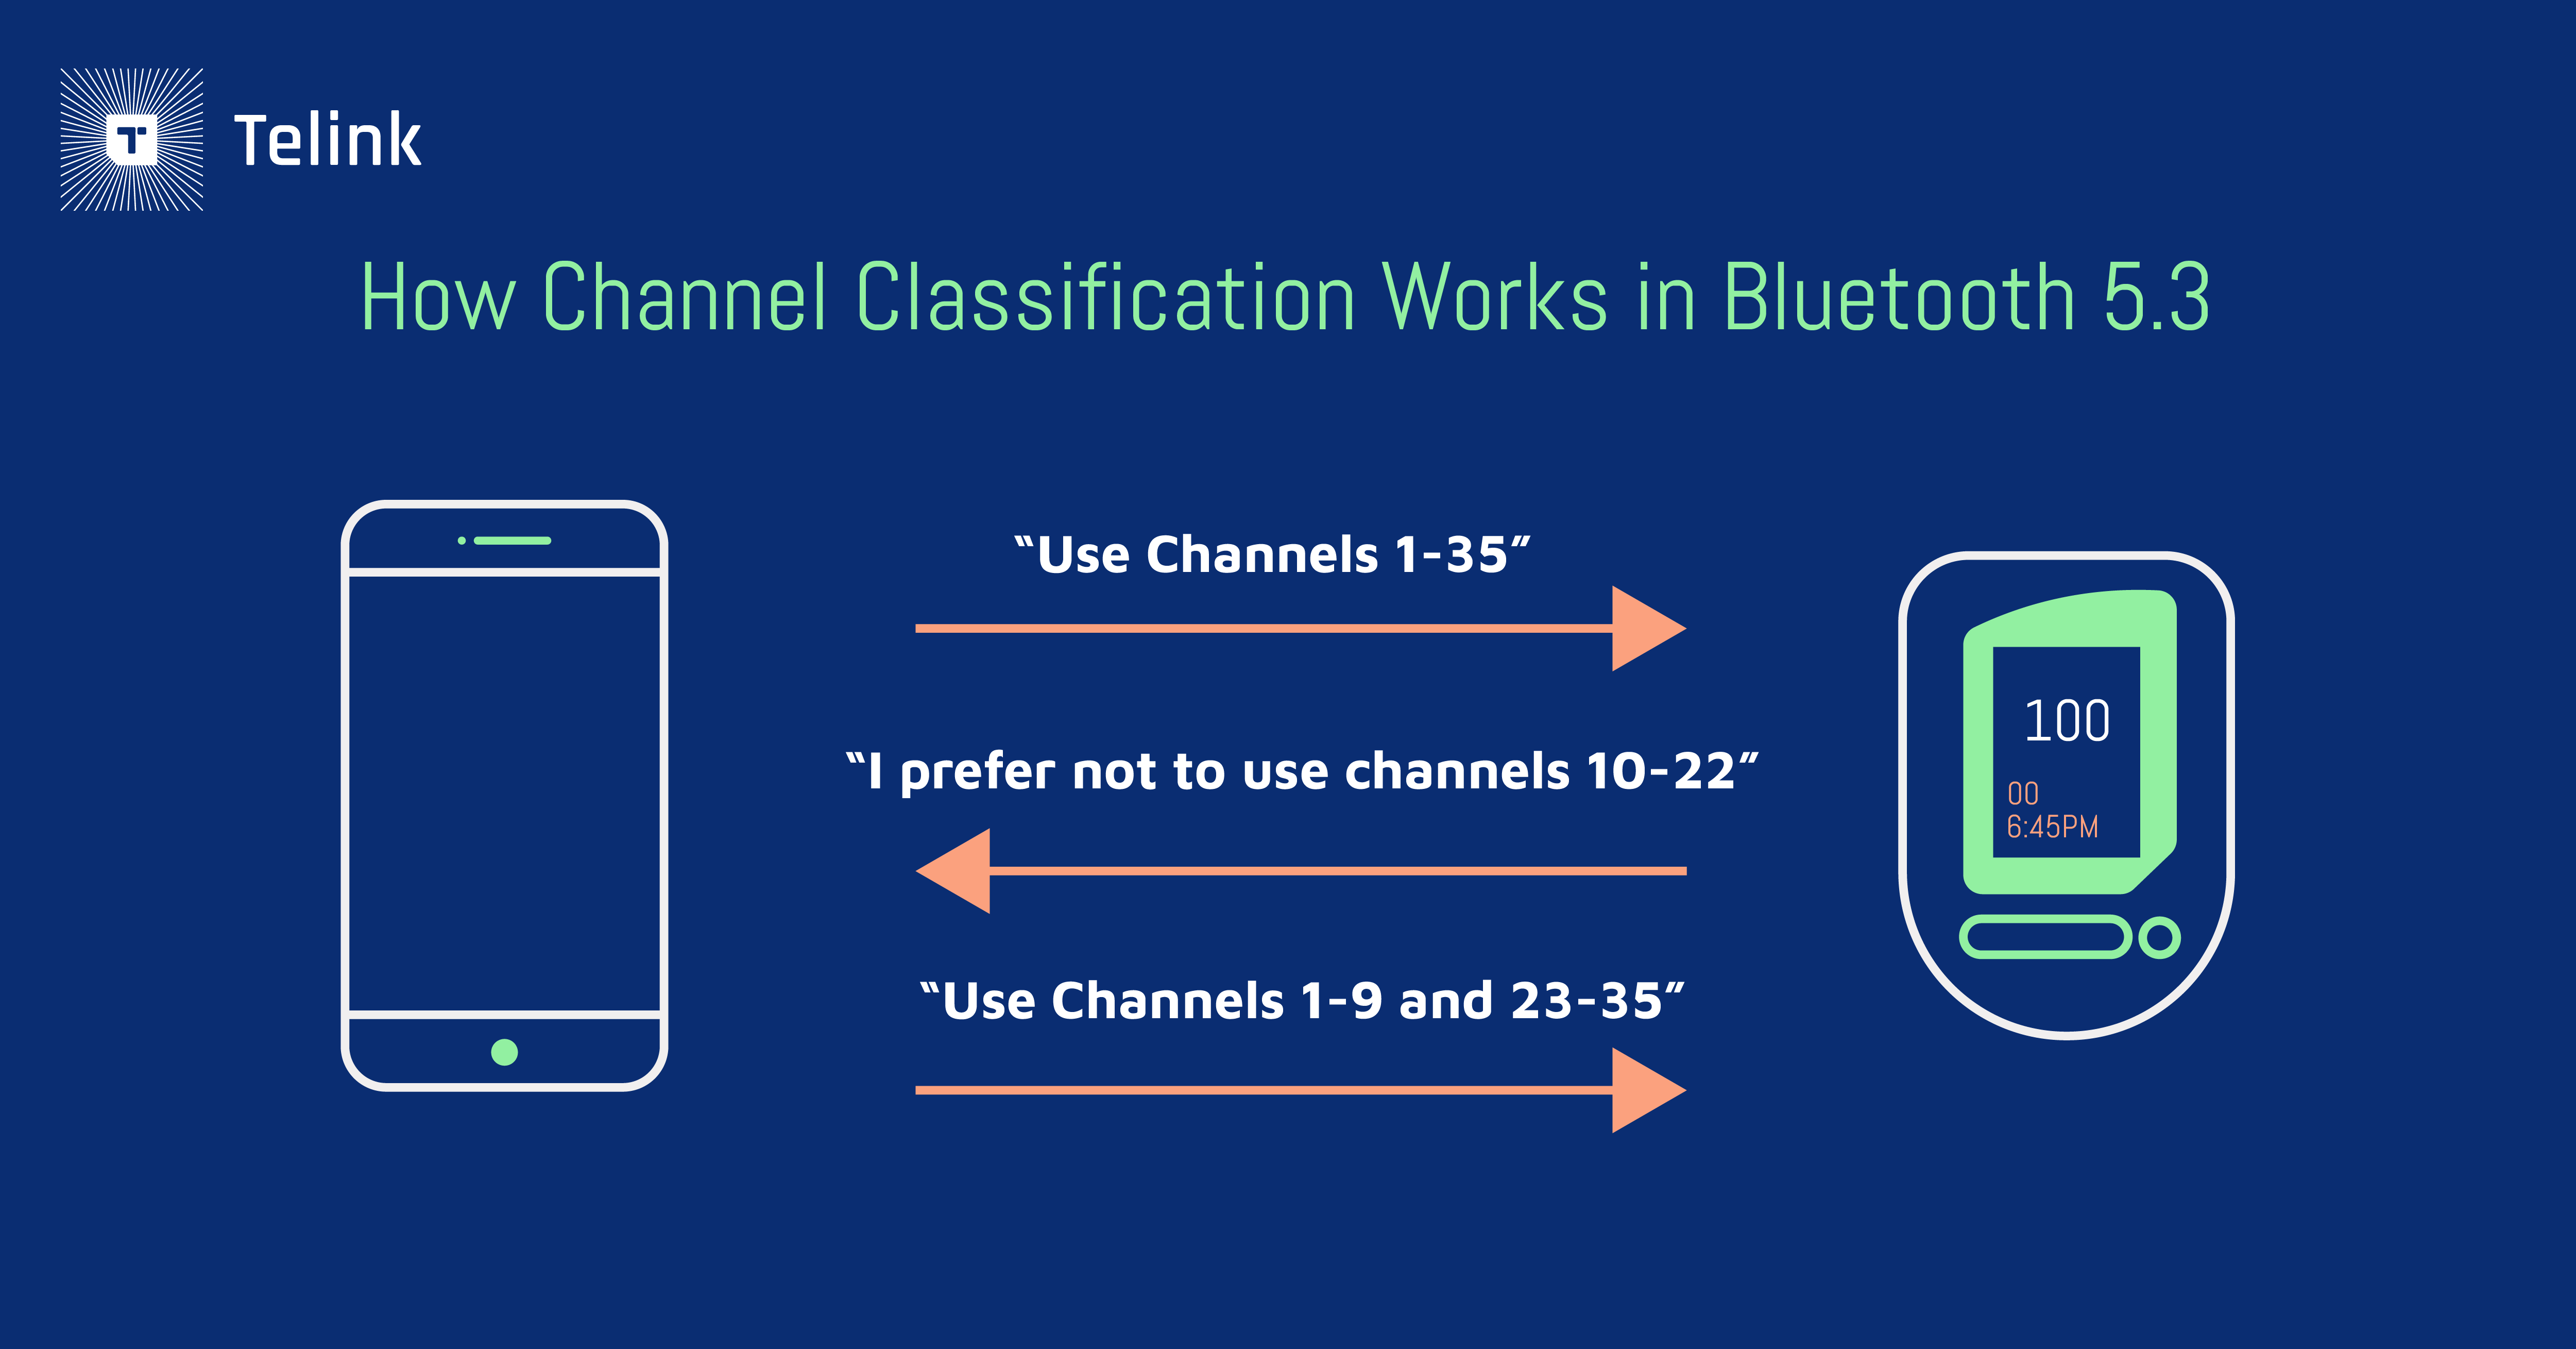 How channel classification works in Bluetooth 5.3